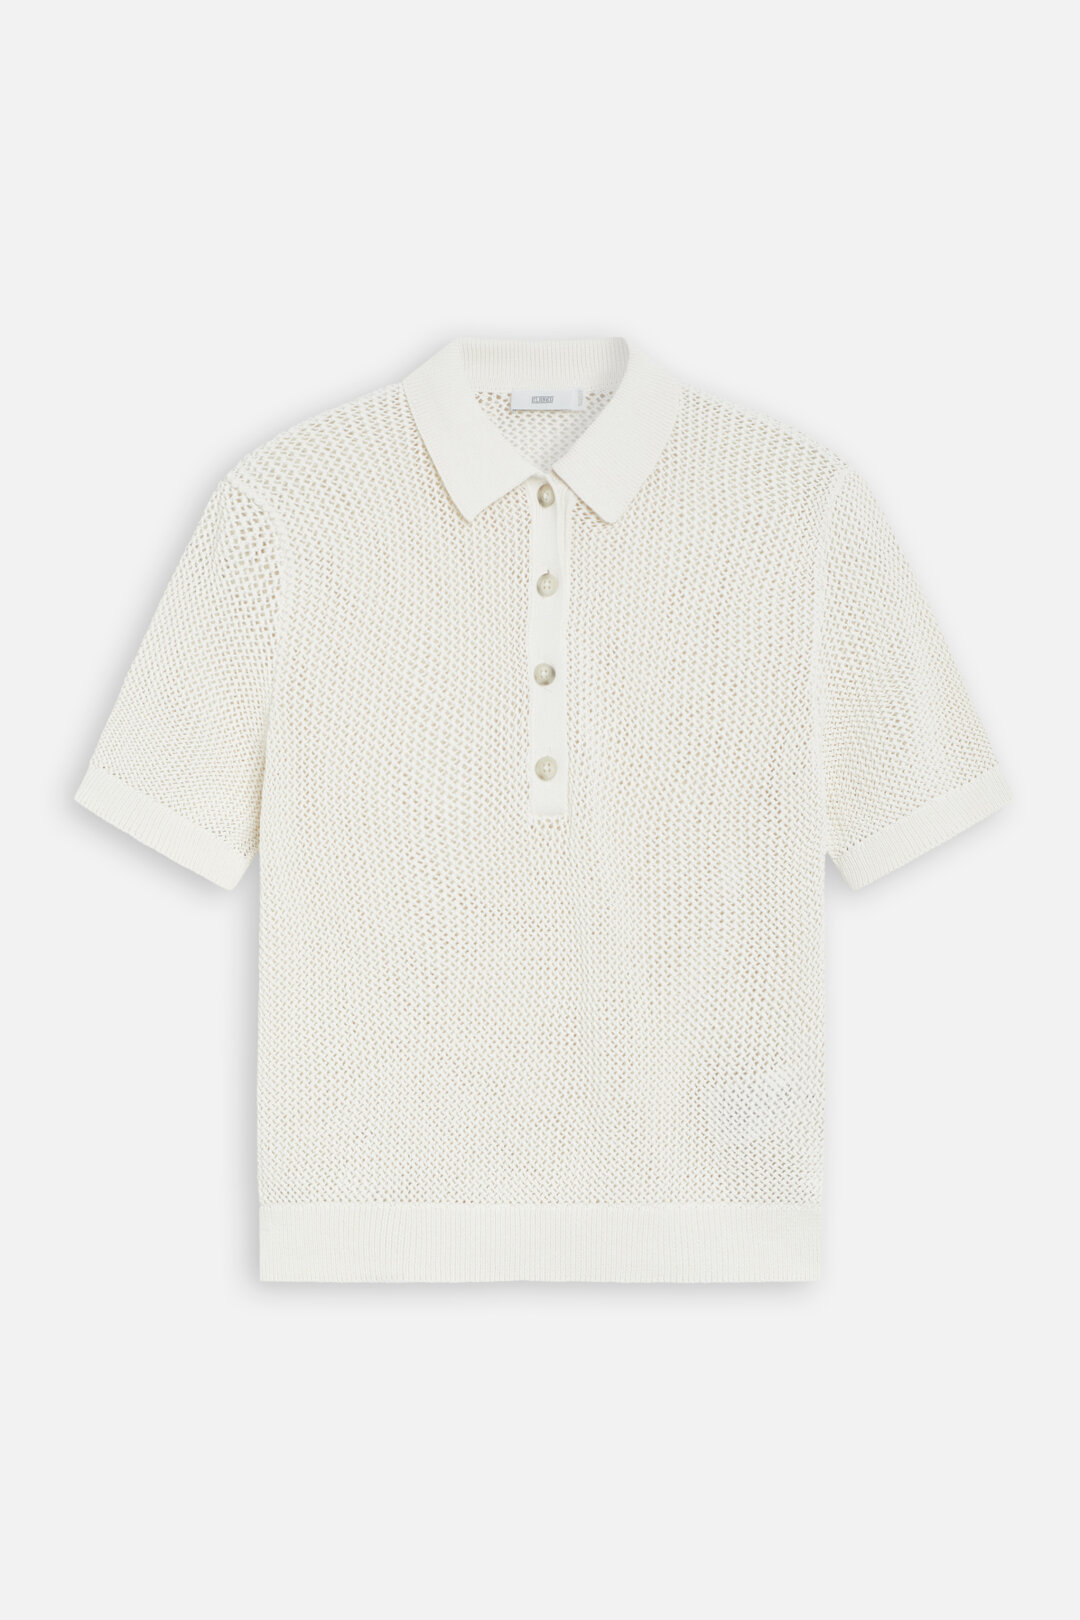 Poloshirt, blanched almond, Close, C96379-95Y-22-206